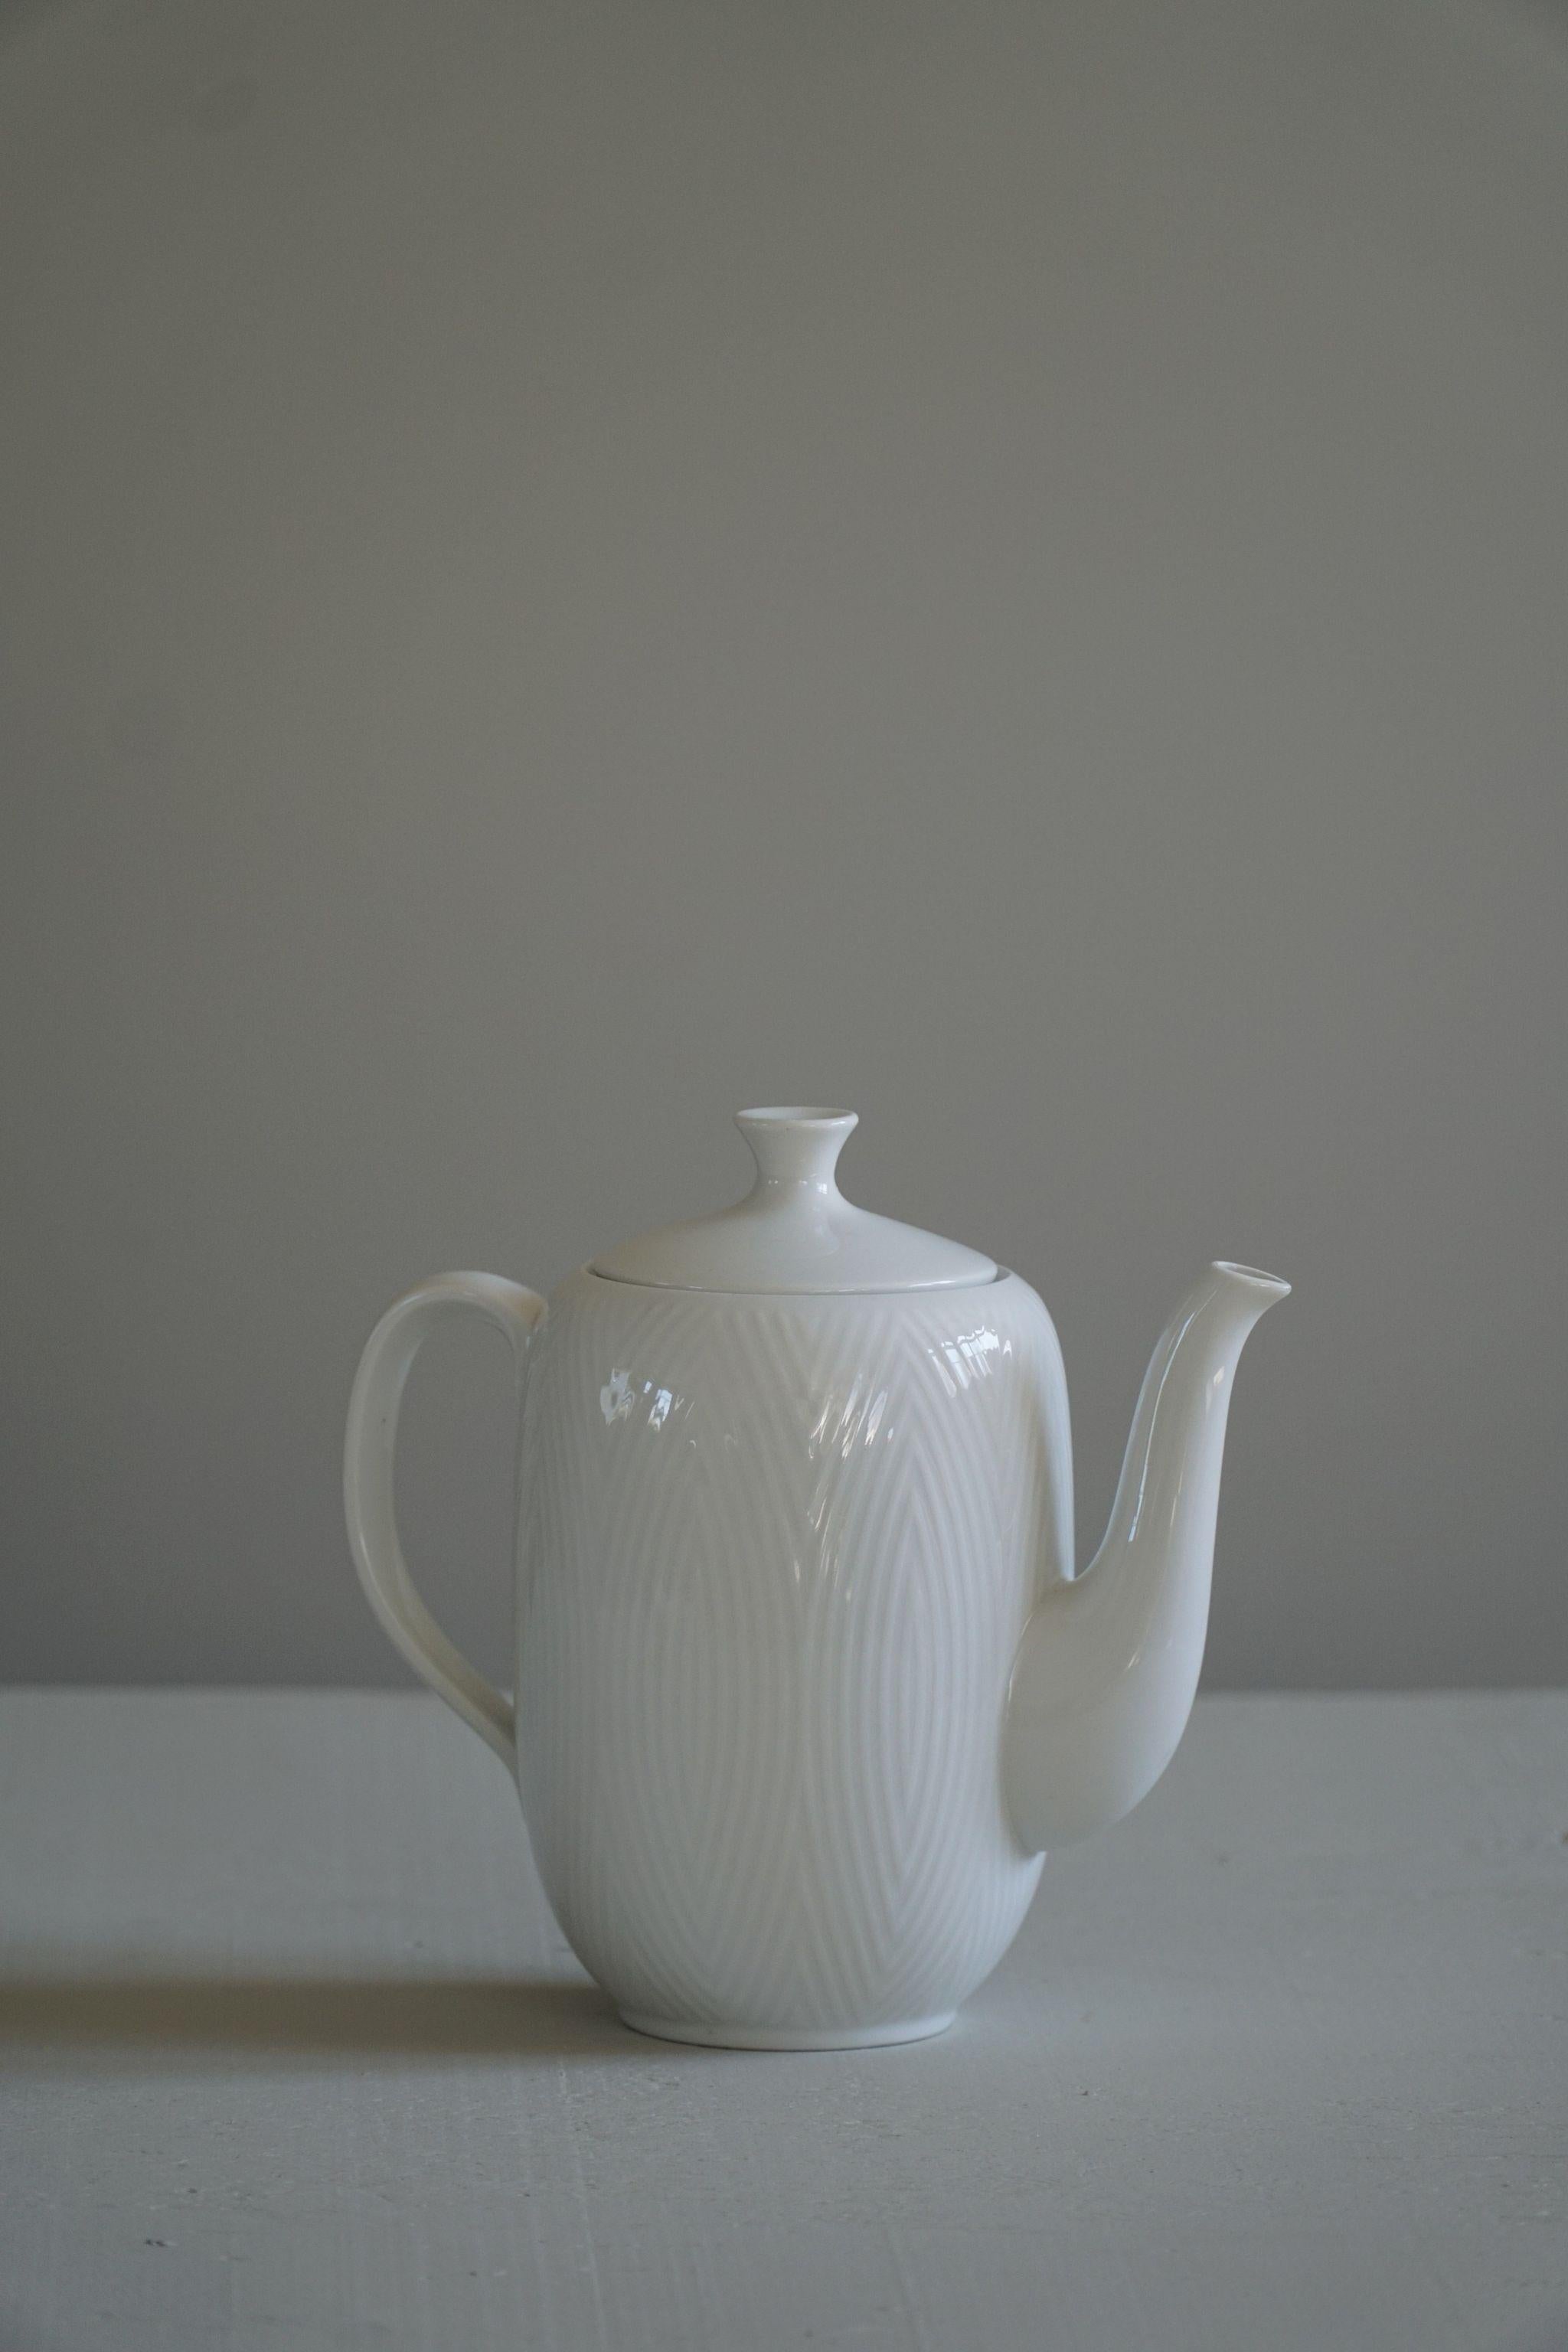 20th Century Axel Salto, Service Set in Porcelain from Royal Copenhagen, Midcentury, 1956 For Sale